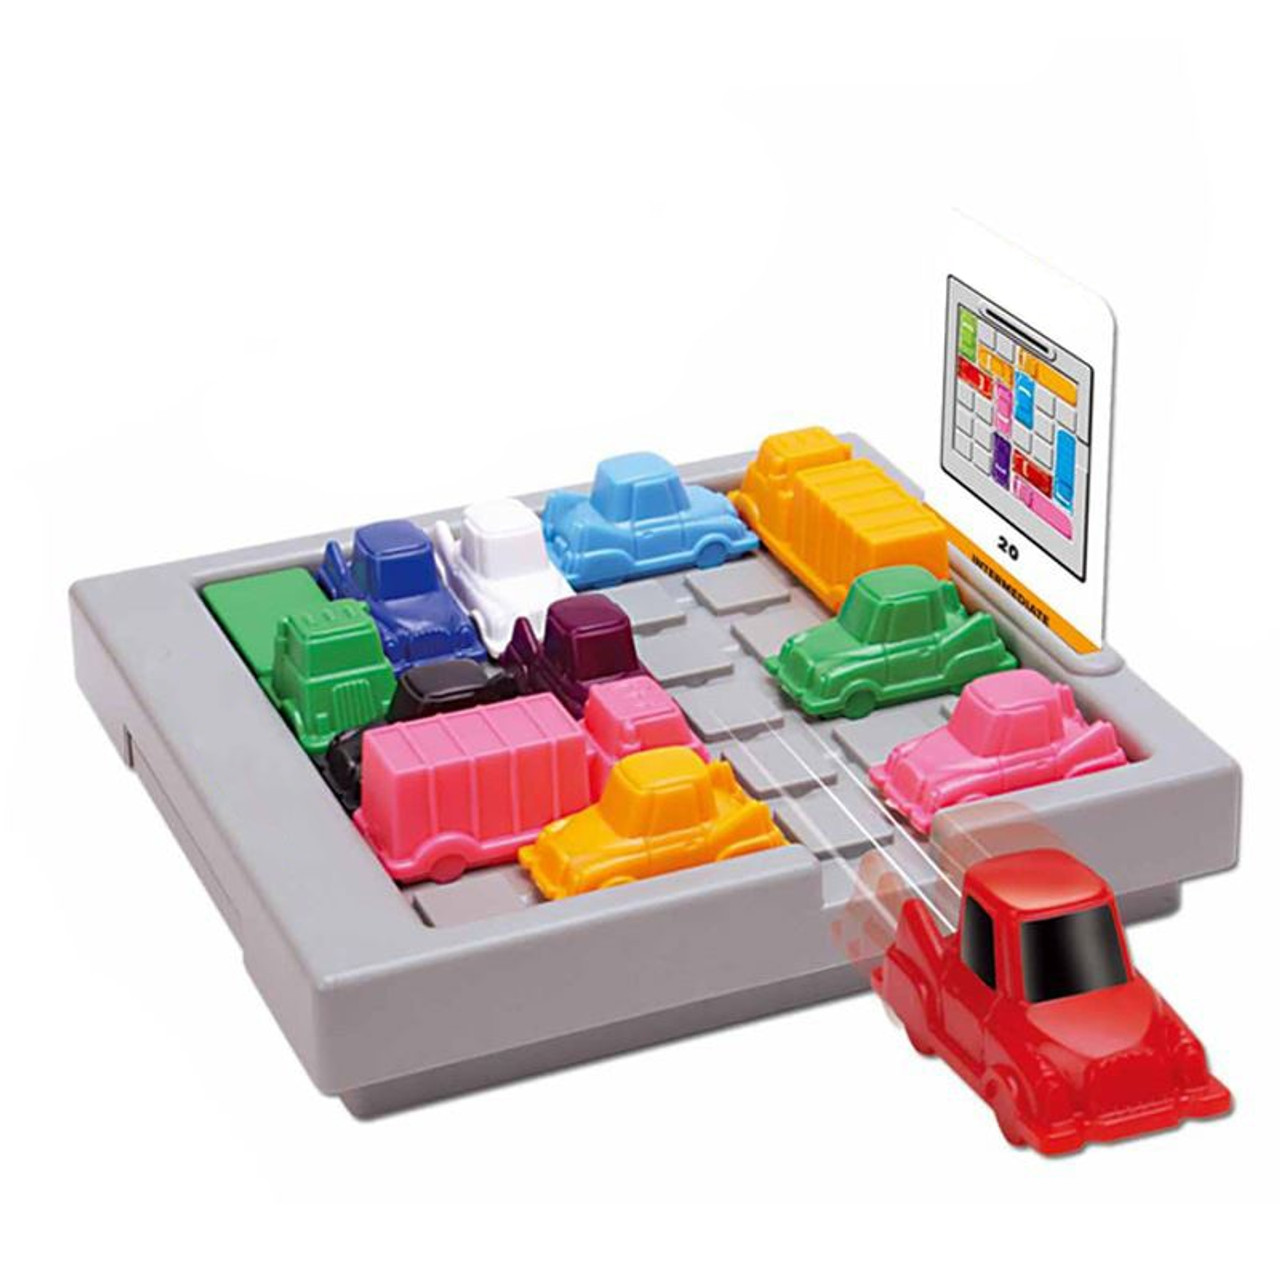 Finger-Rock-Rush-Hour-IQ-Car-Puzzle-Maze-Toy-Board-Game-Learning-Educational-Car-Jigsaw-Kids__67701.1545390441.jpg